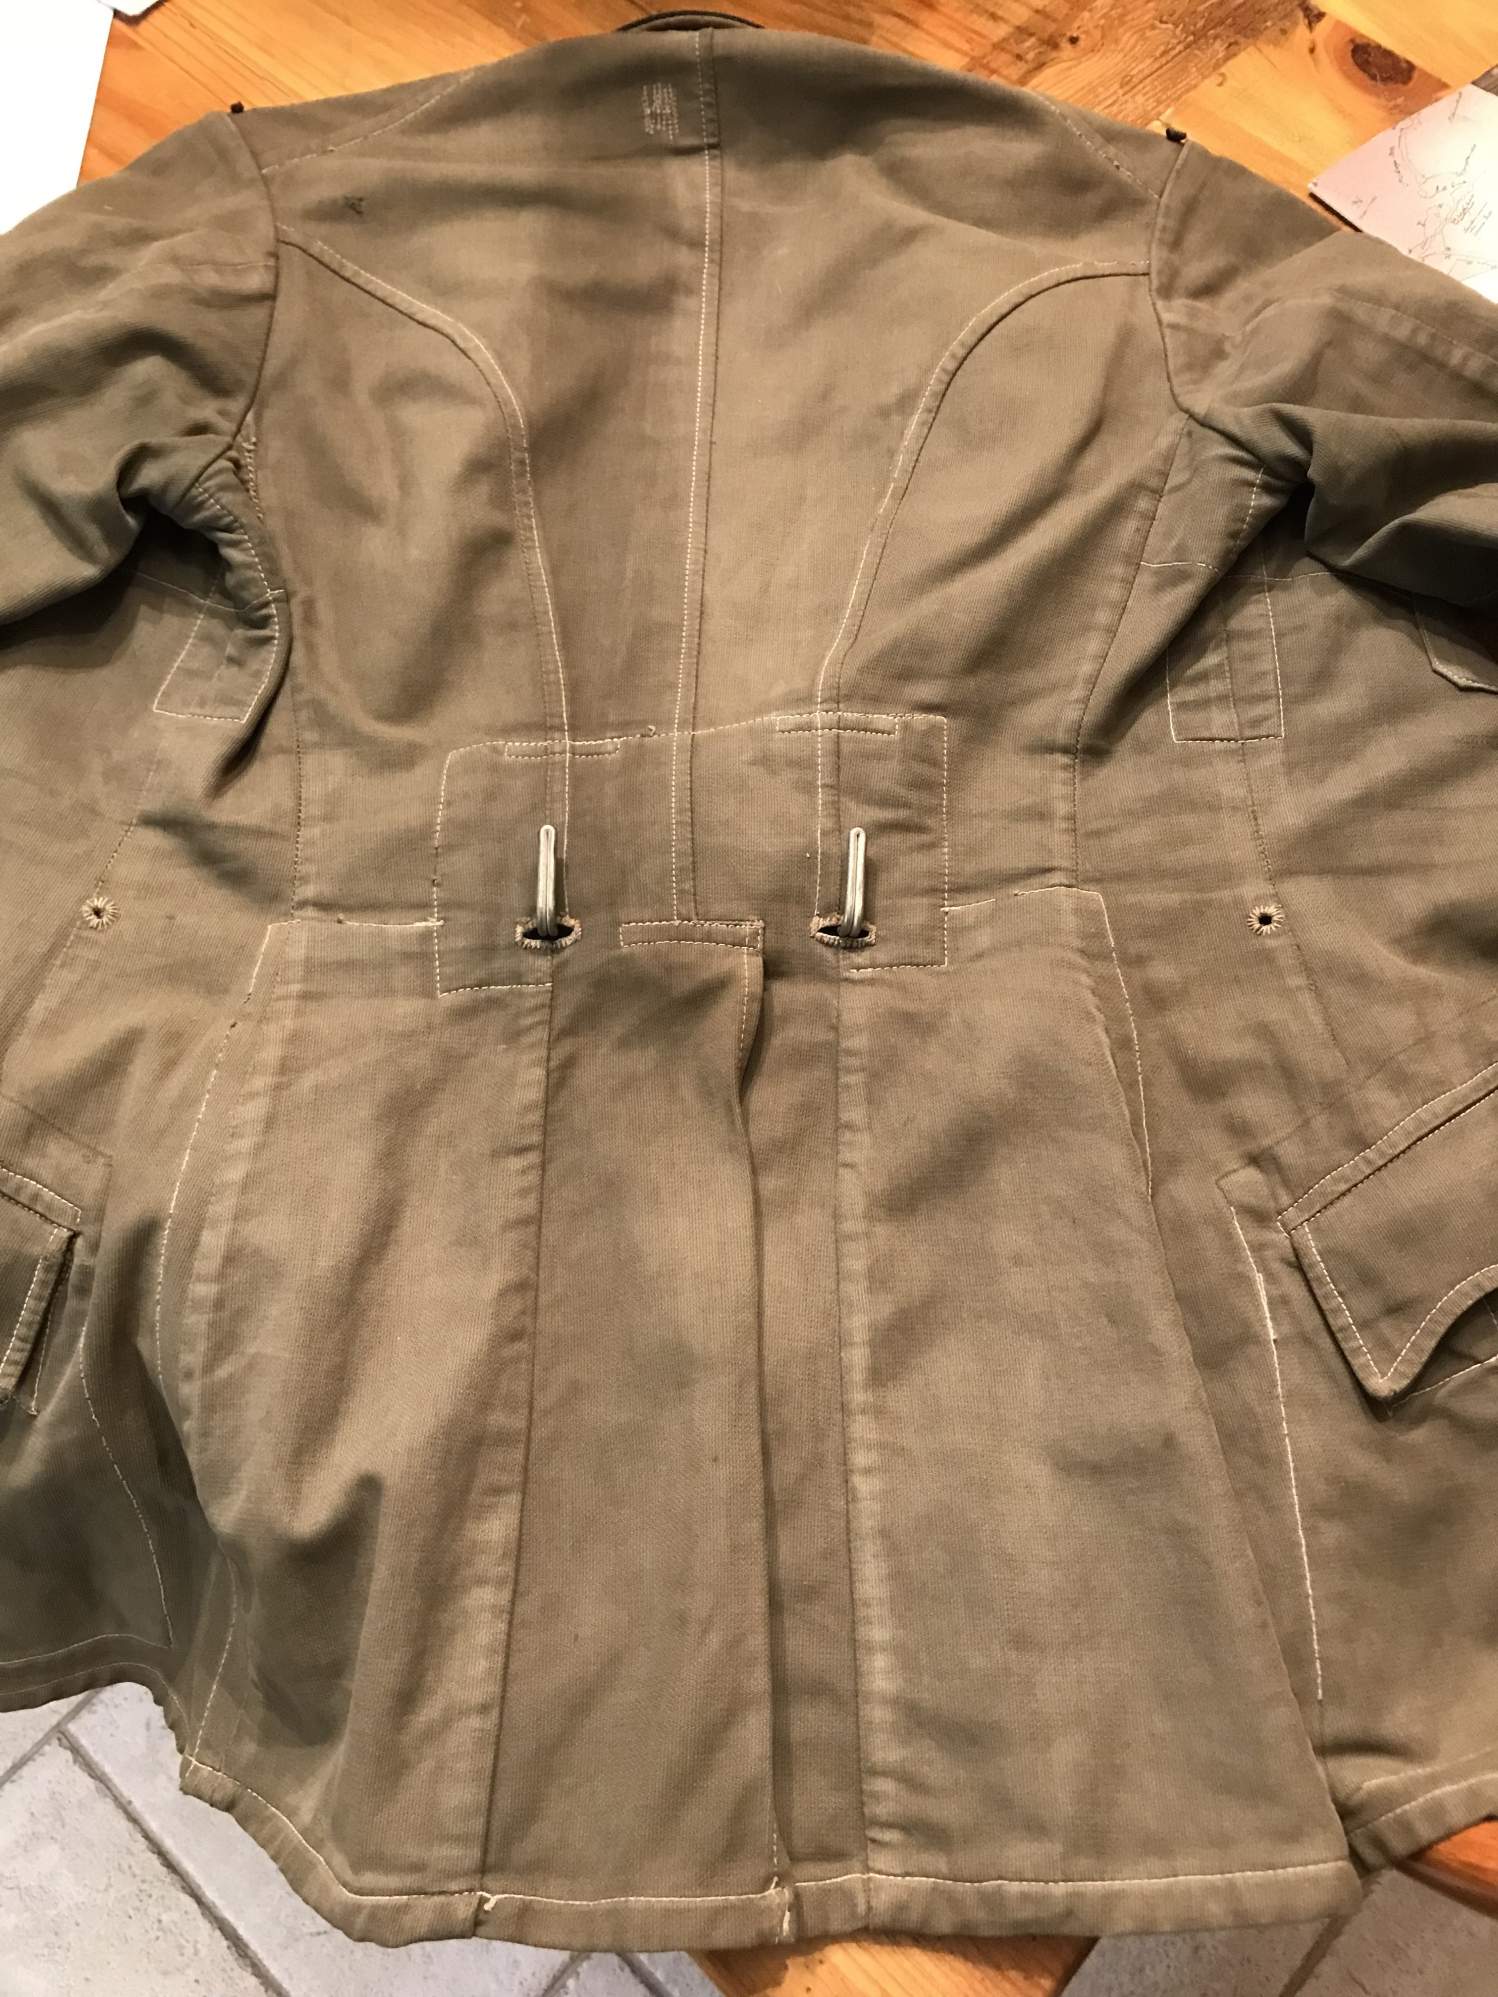 Thoughts on German Tunic